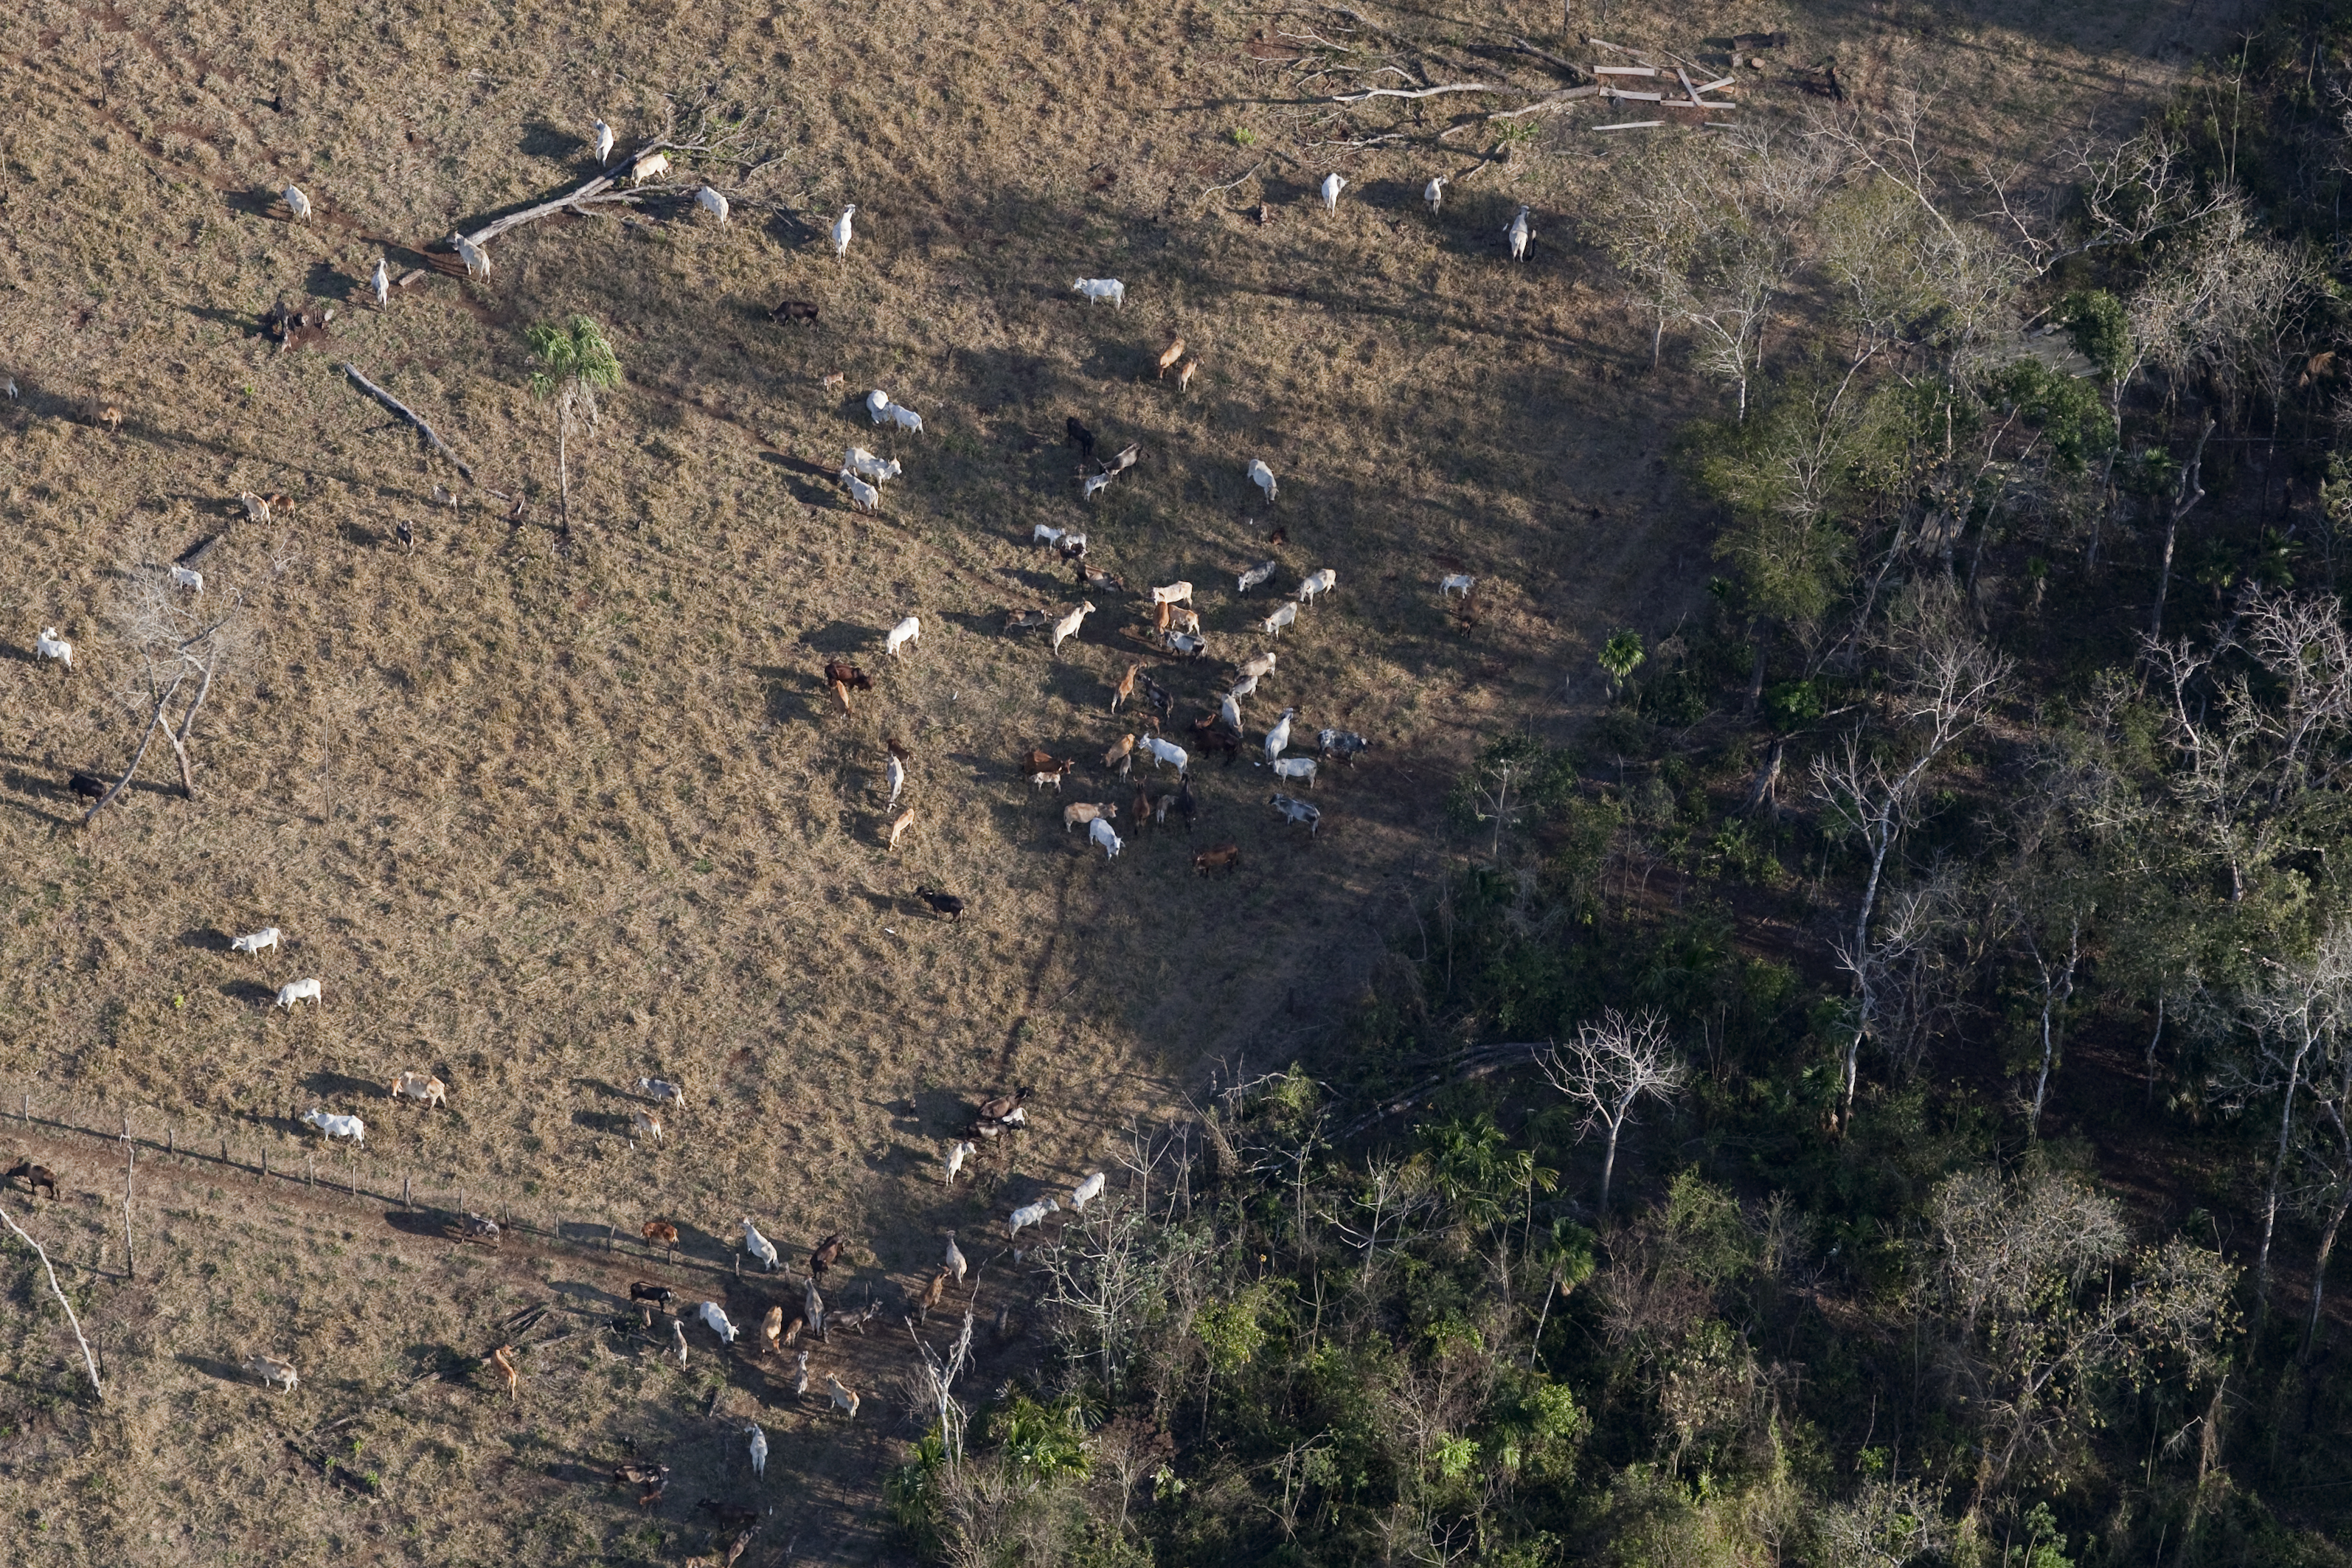 Cattle ranging in an area that was previously intact forest in Mesoamerica. (Photo courtesy of Wildlife Conservation Society)